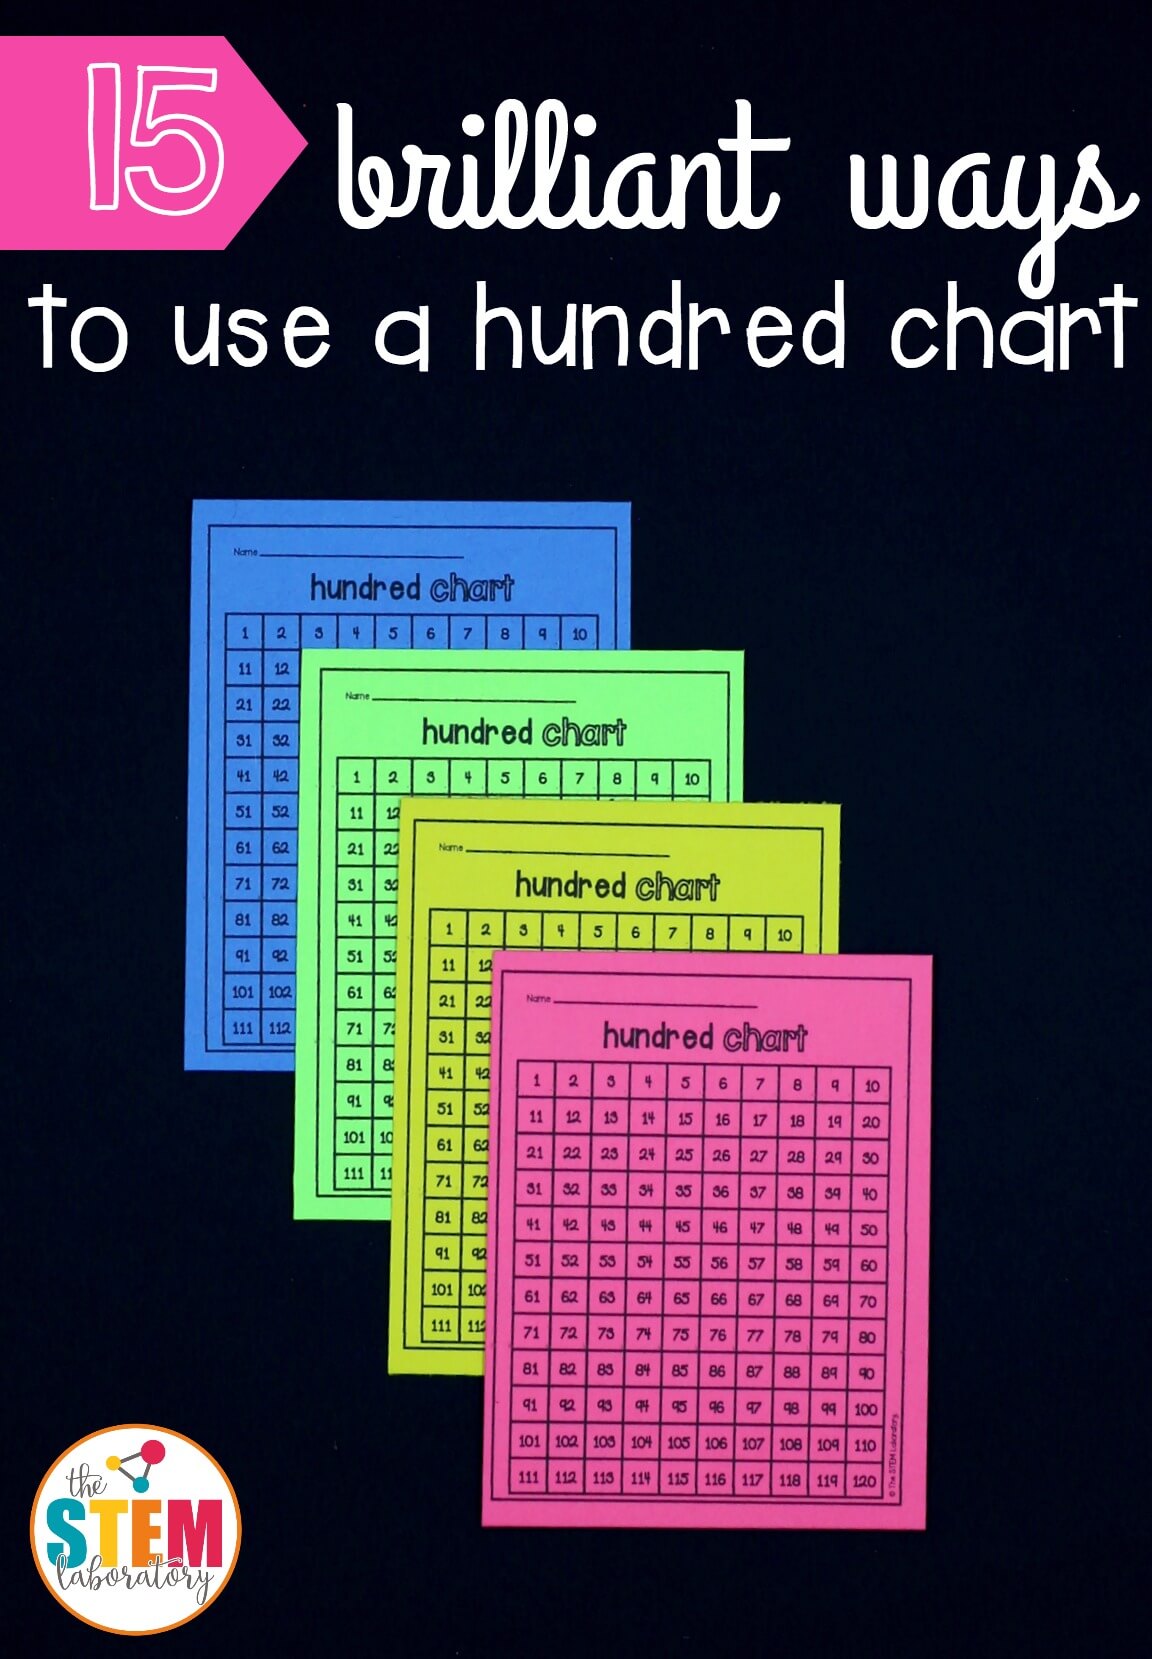 15 Brilliant Ways to Use a Hundred Chart - The Stem Laboratory